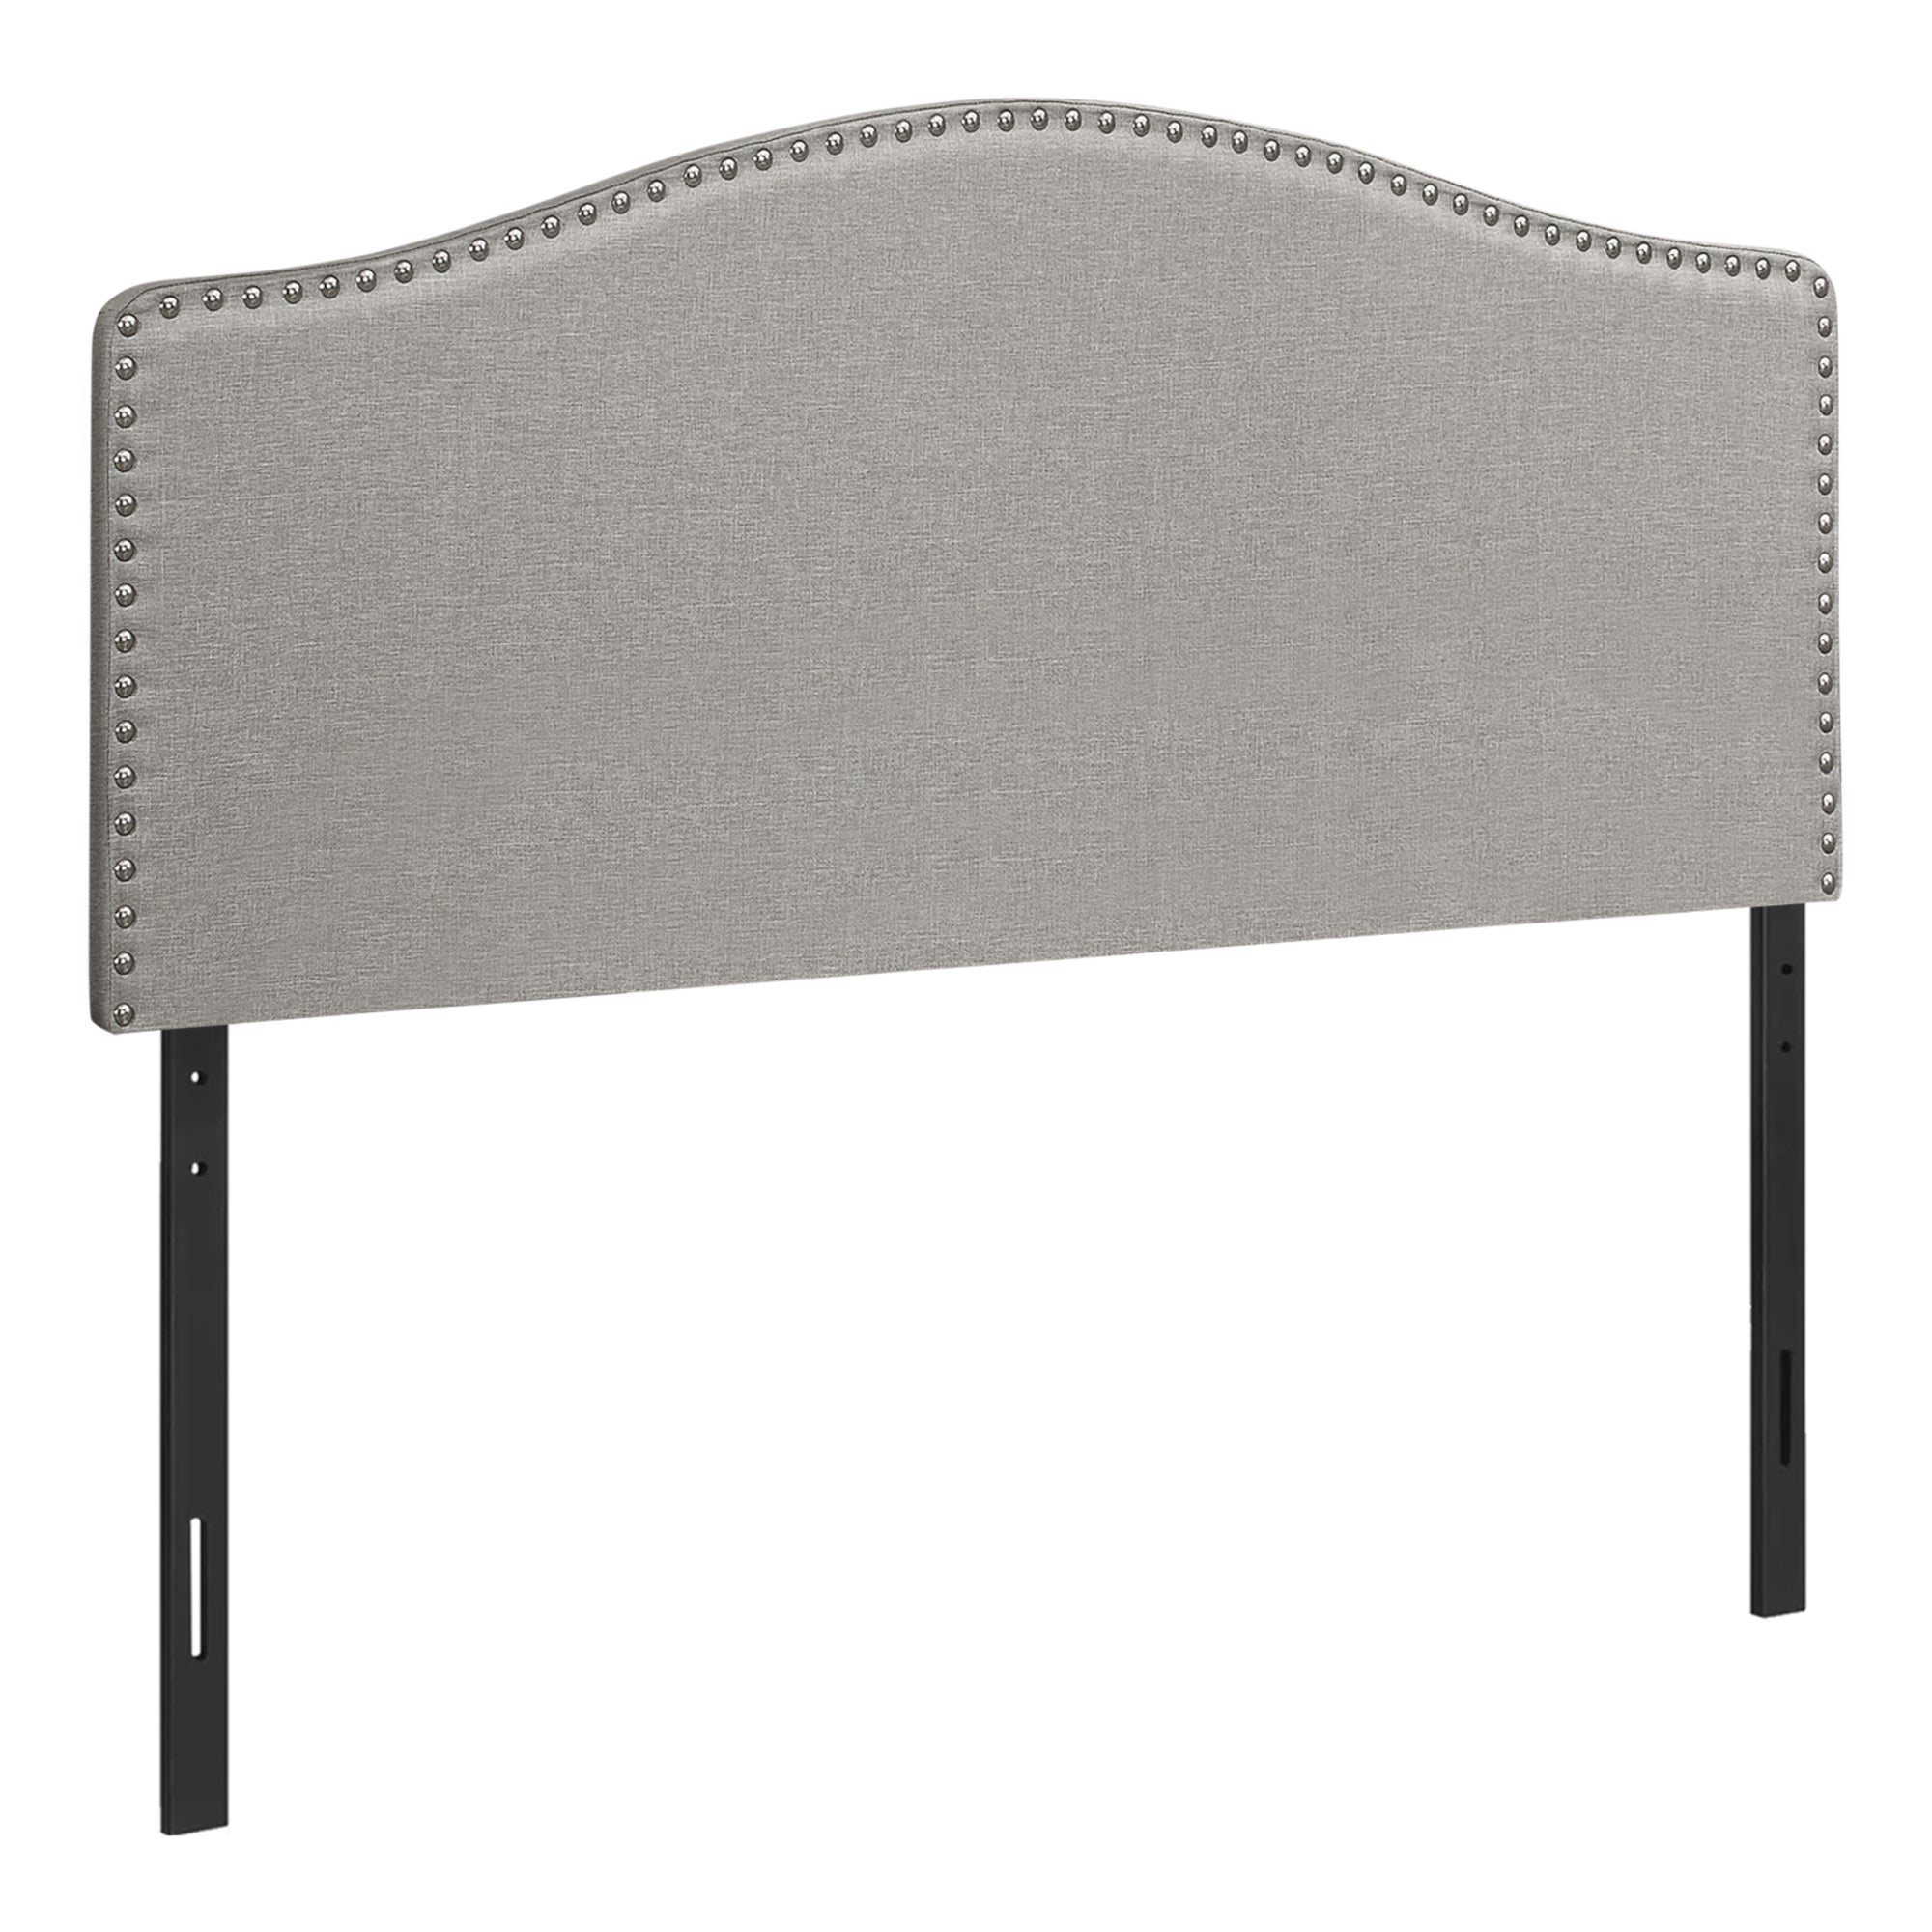 MN-566013Q    Headboard, Bedroom, Queen Size, Upholstered, Leather Look, Wooden Frame, Grey, Black, Contemporary, Modern